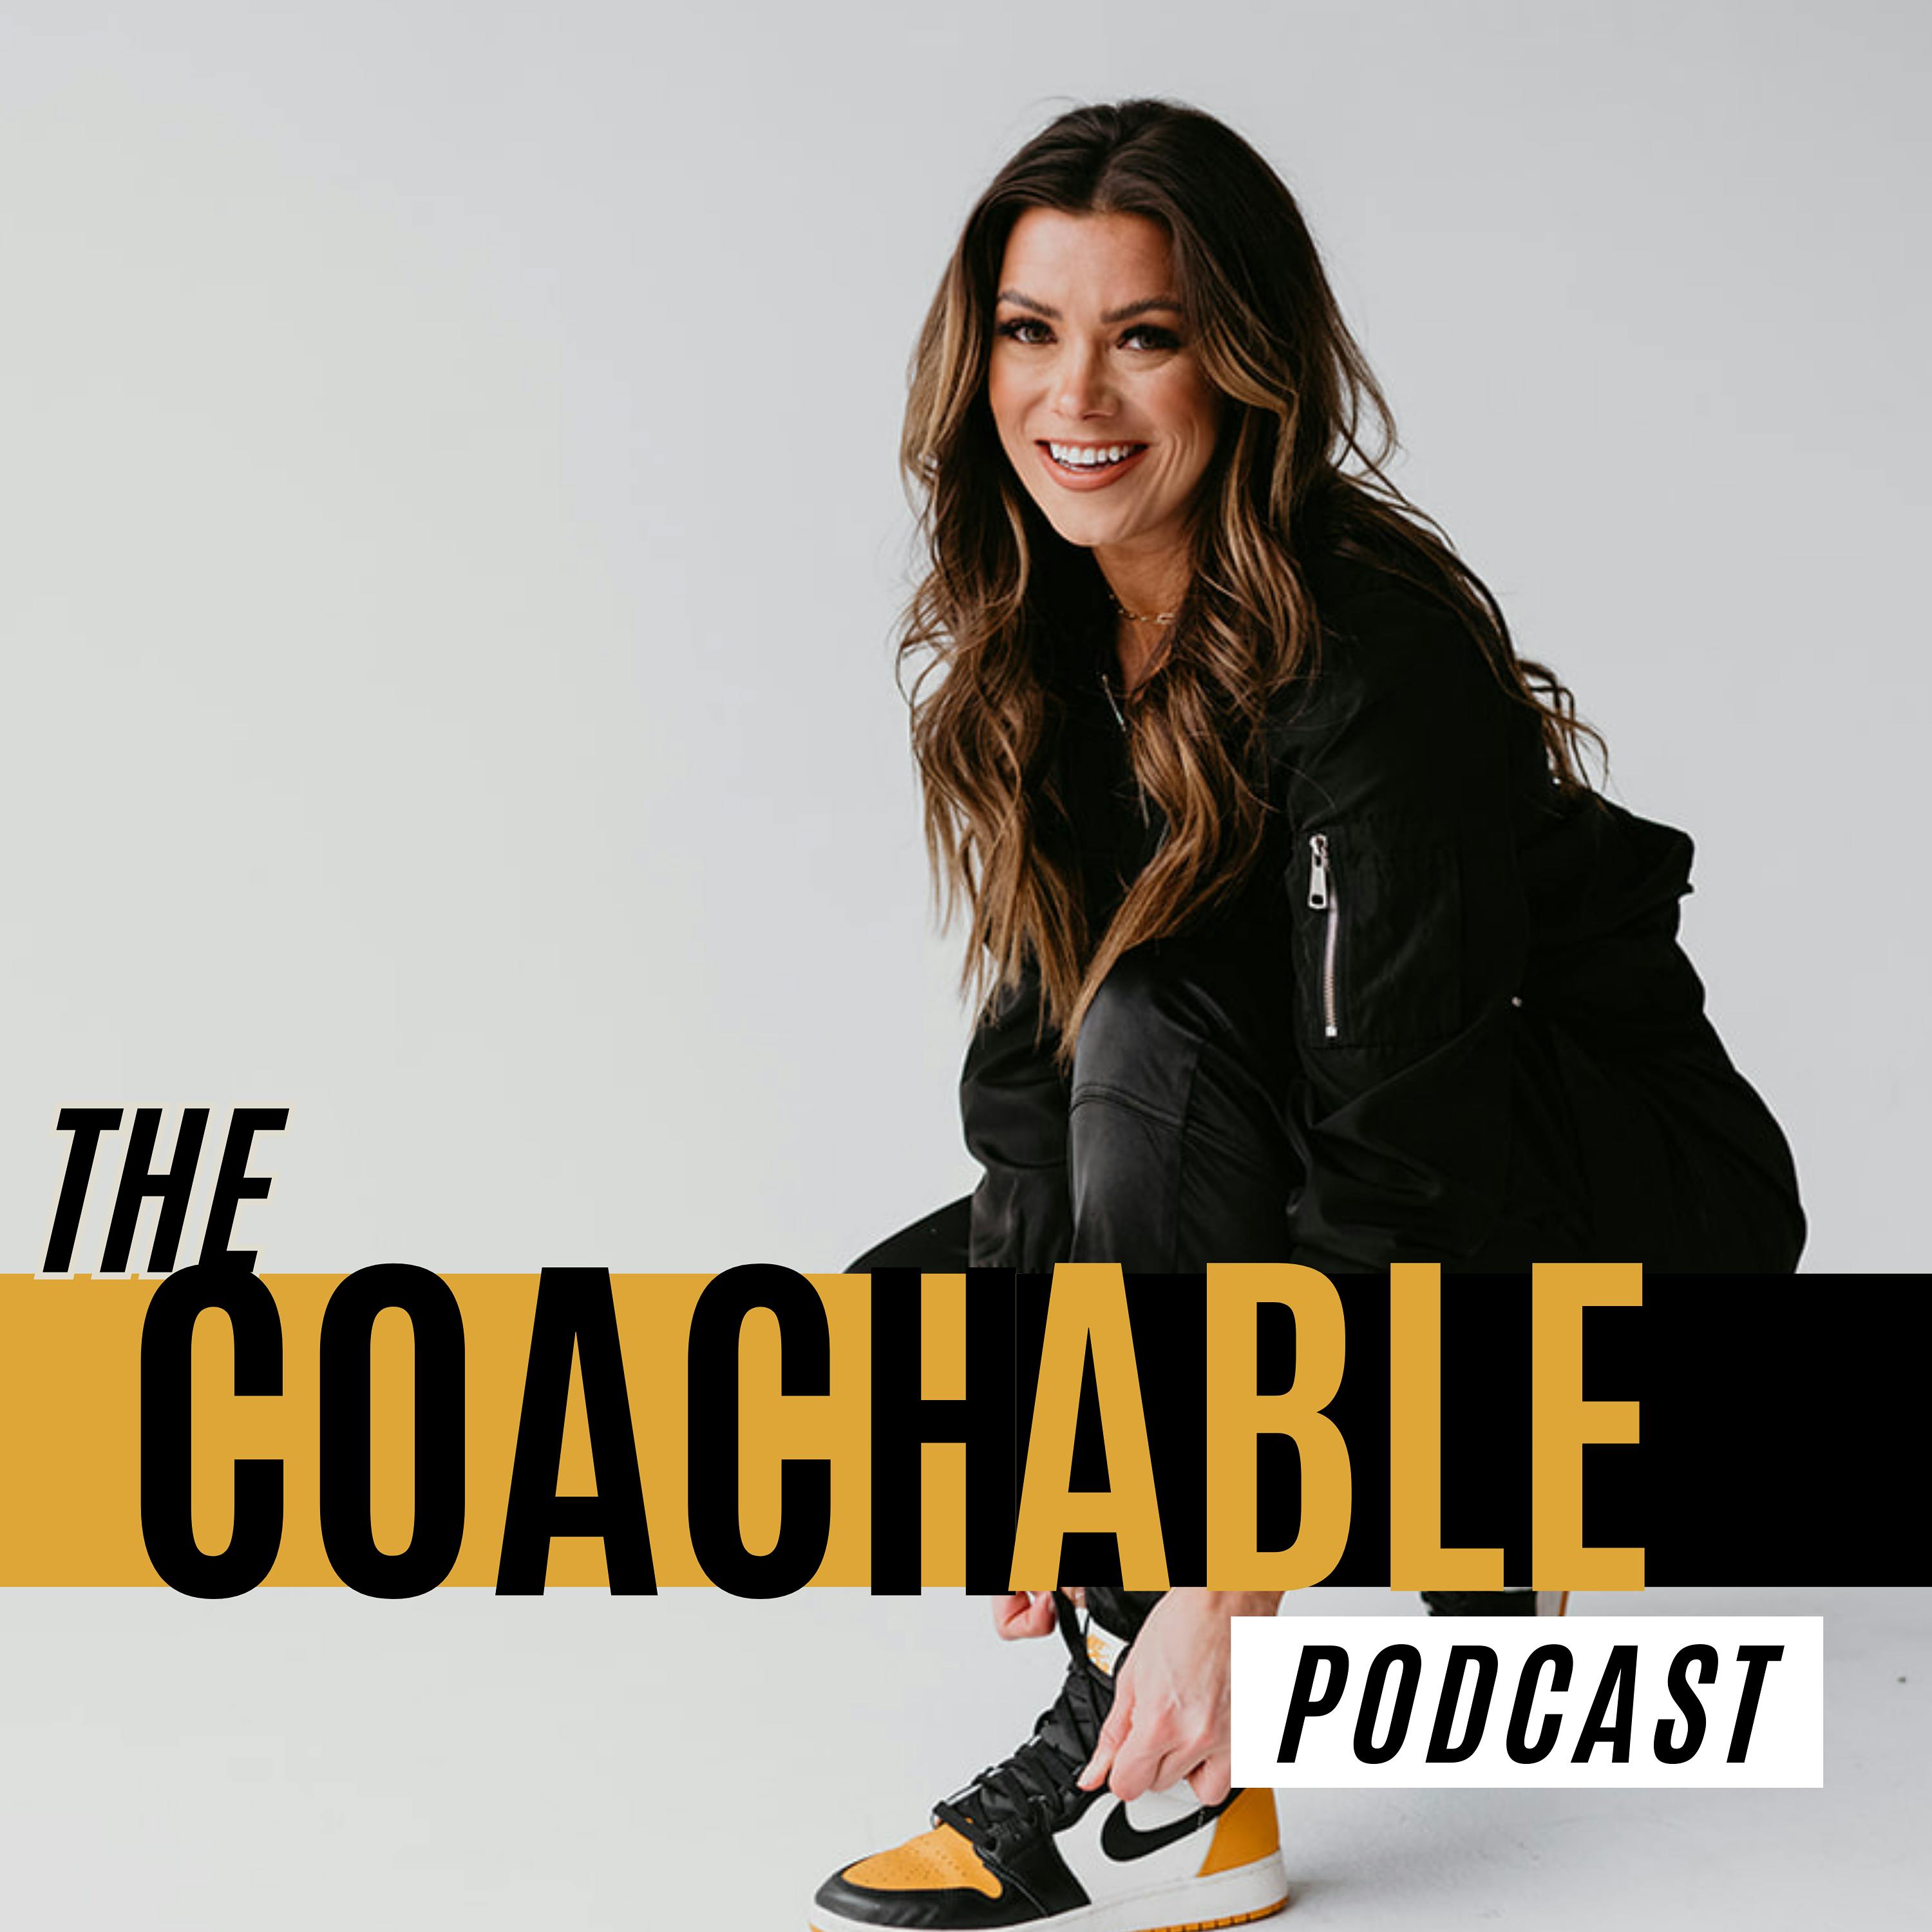 The Coachable Podcast podcast show image